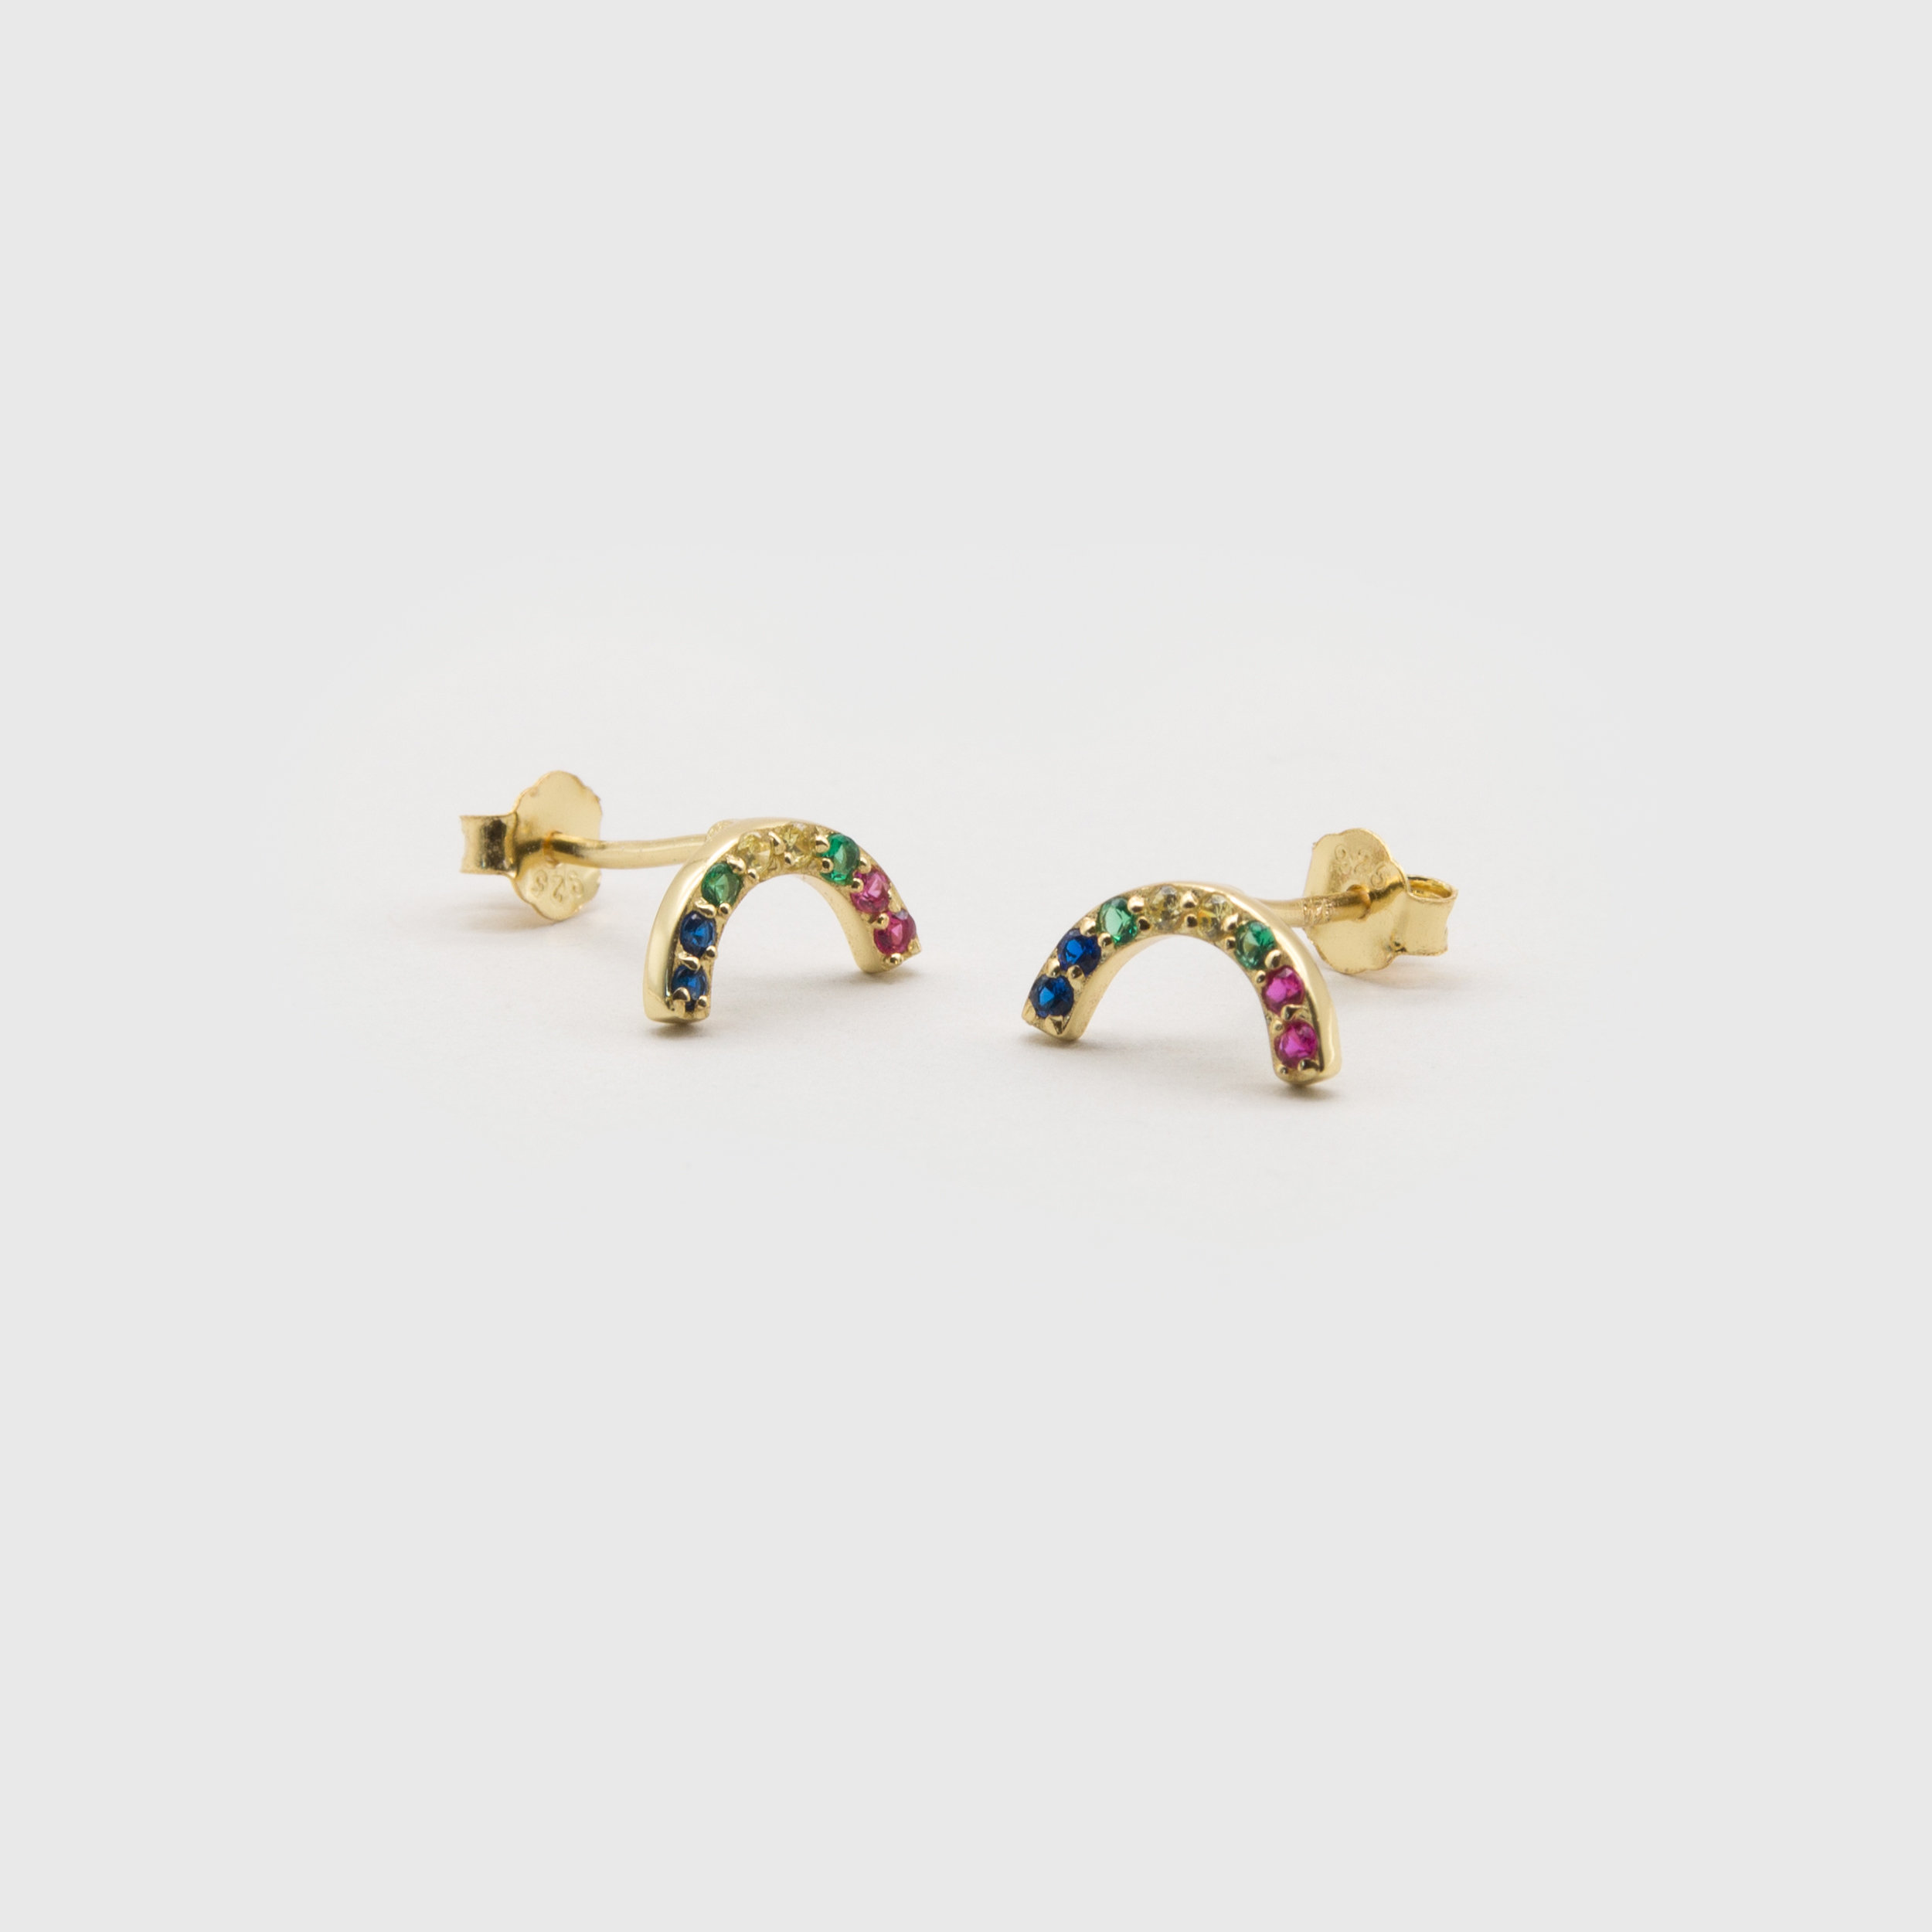 Kuku gold rainbow earrings with colourful stones